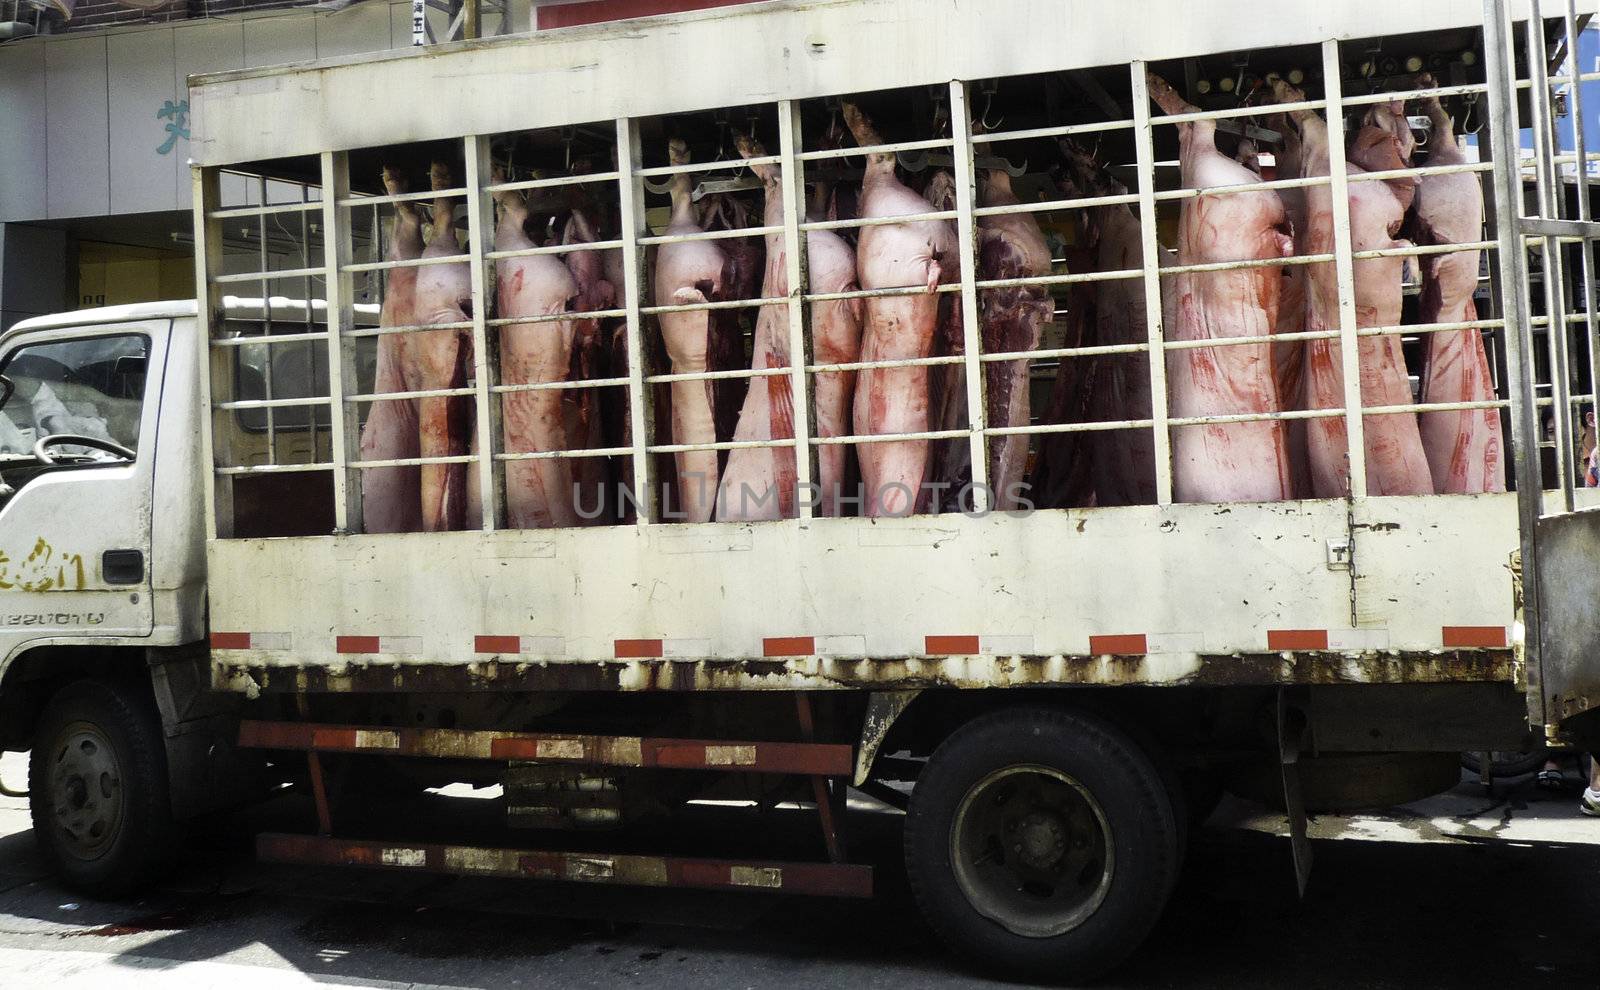 Hang Racks of Pig on a truck in Asia.